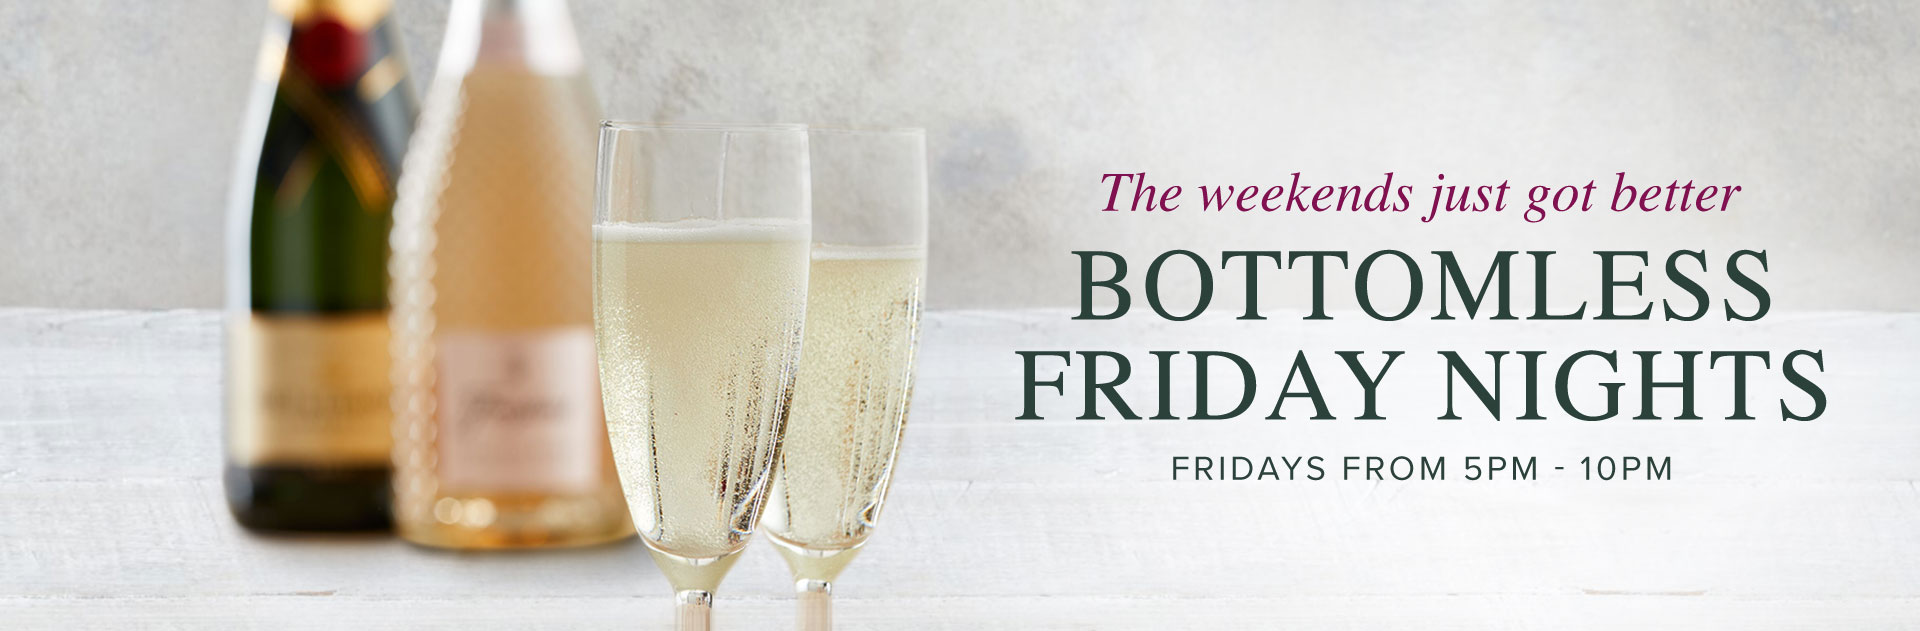 Bottomless Friday at Queens Head, West Chislehurst